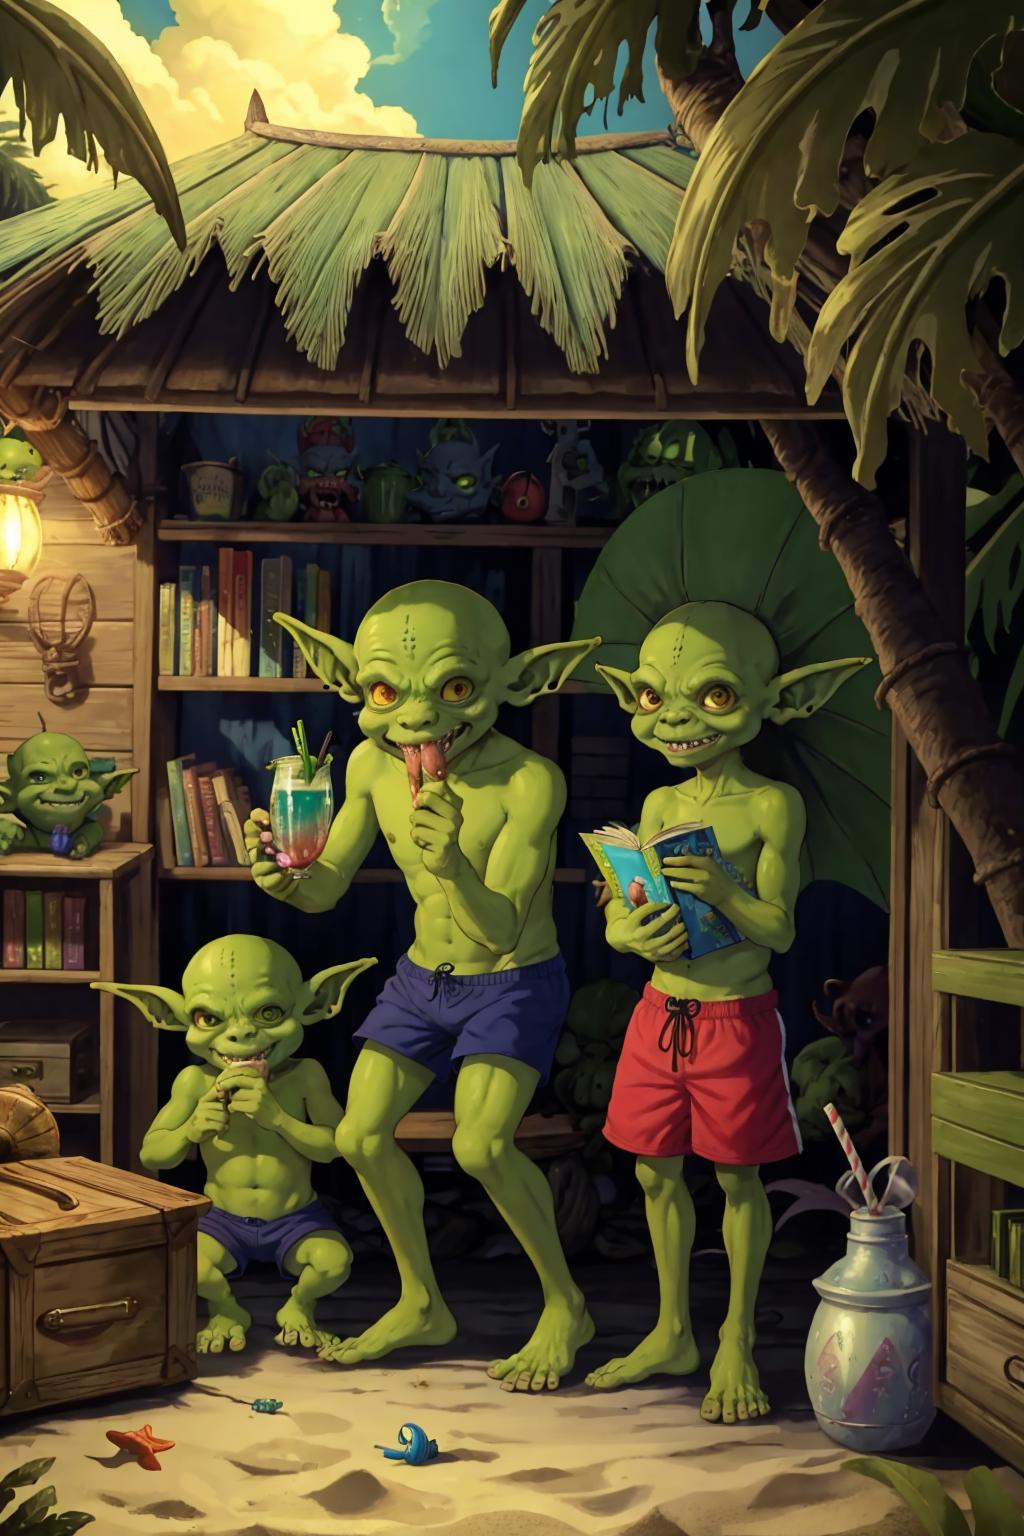 A cartoon image of two young green goblin-like creatures standing in a room.